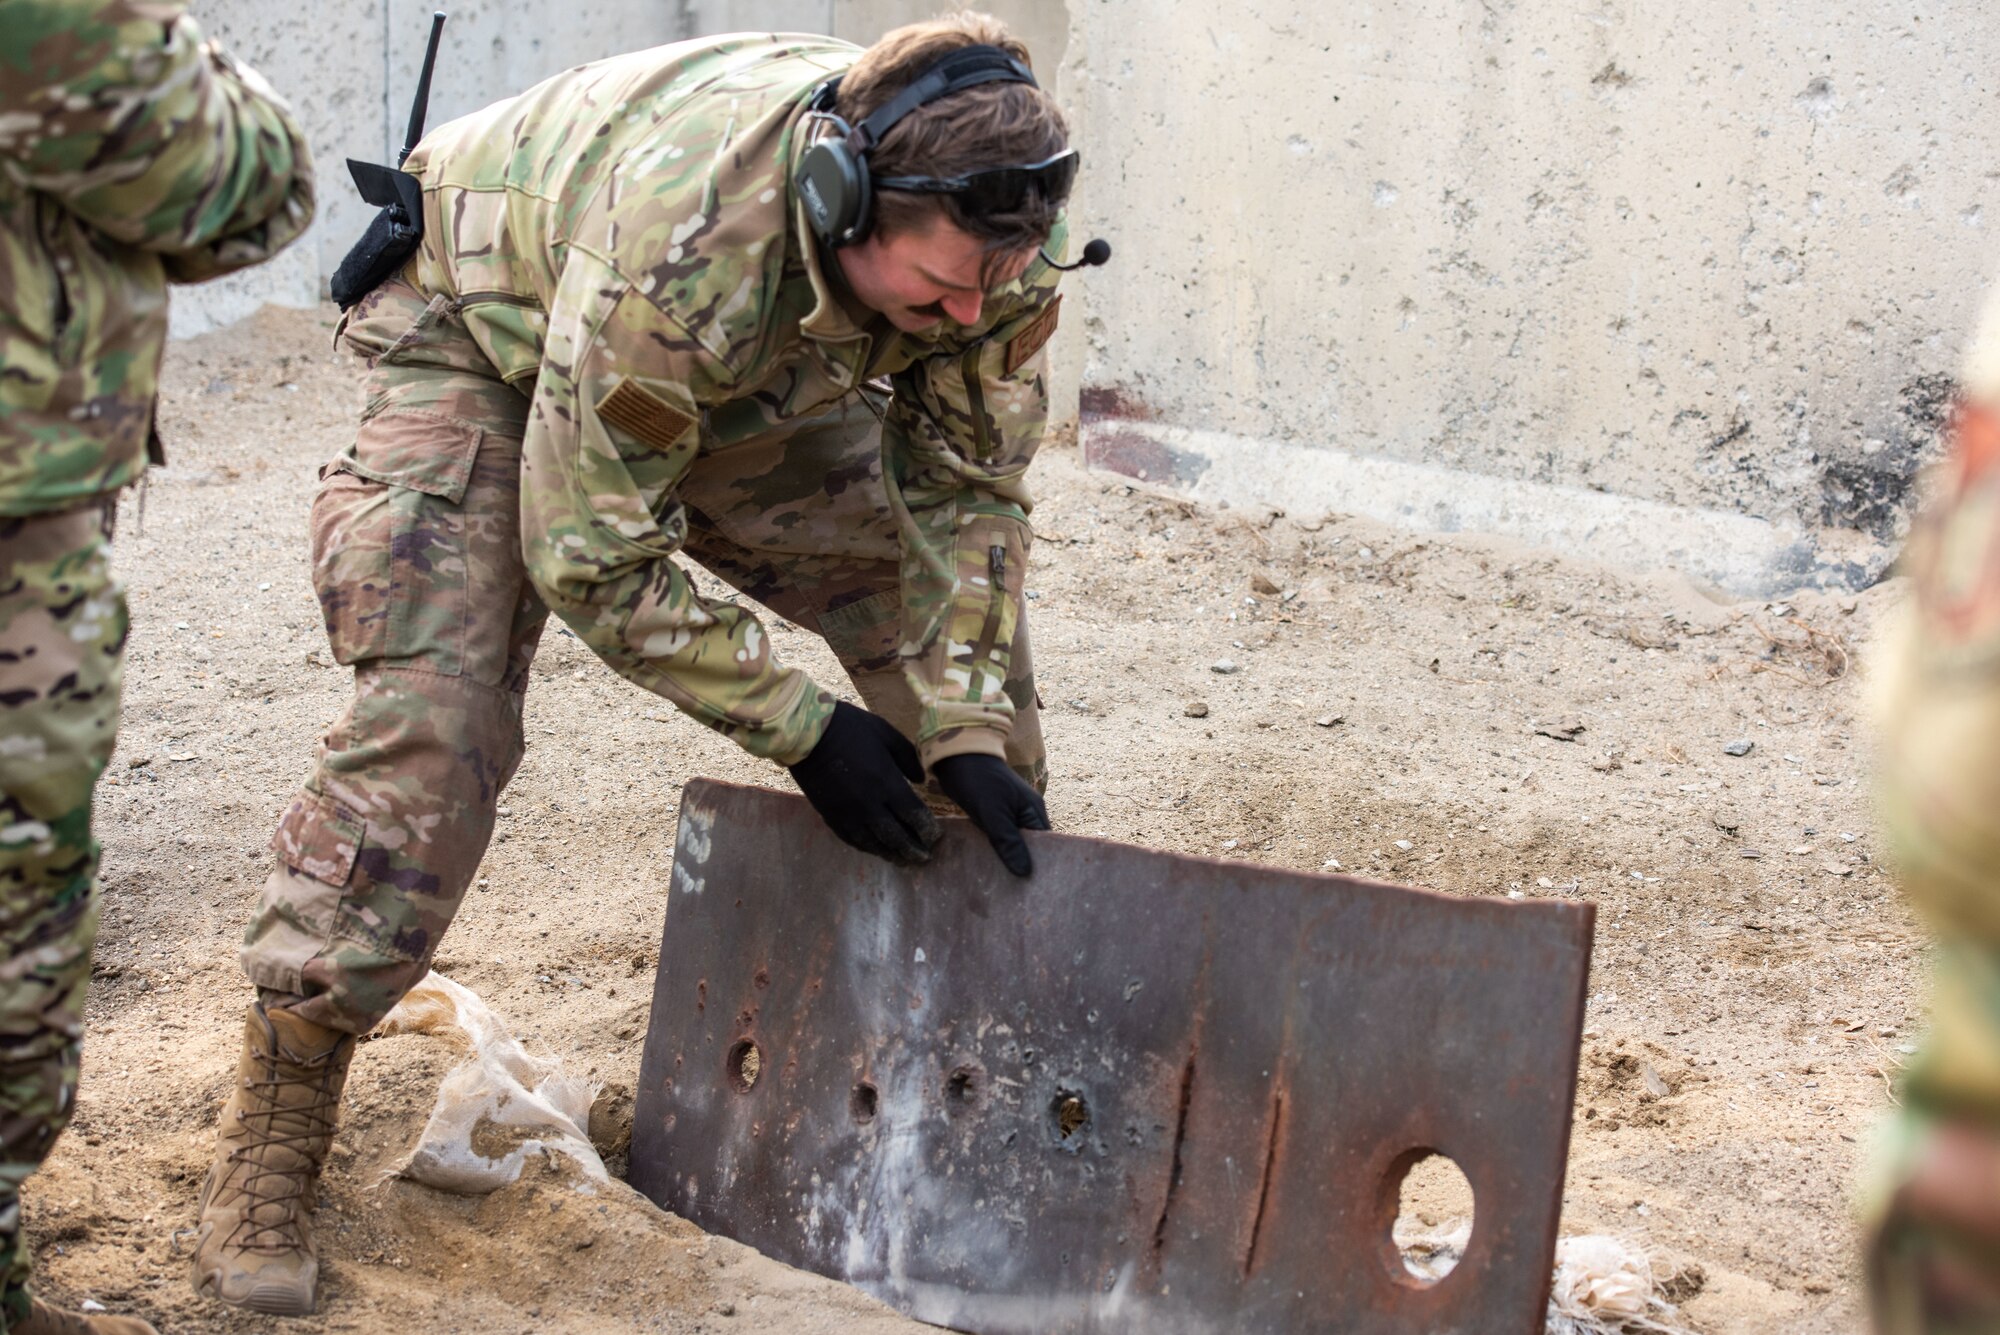 Staff Sgt. Ryan Burks, 51st Civil Engineer Squadron Explosive Ordnance Disposal (EOD) operations non-commissioned officer in charge, displays the aftermath of a test explosion